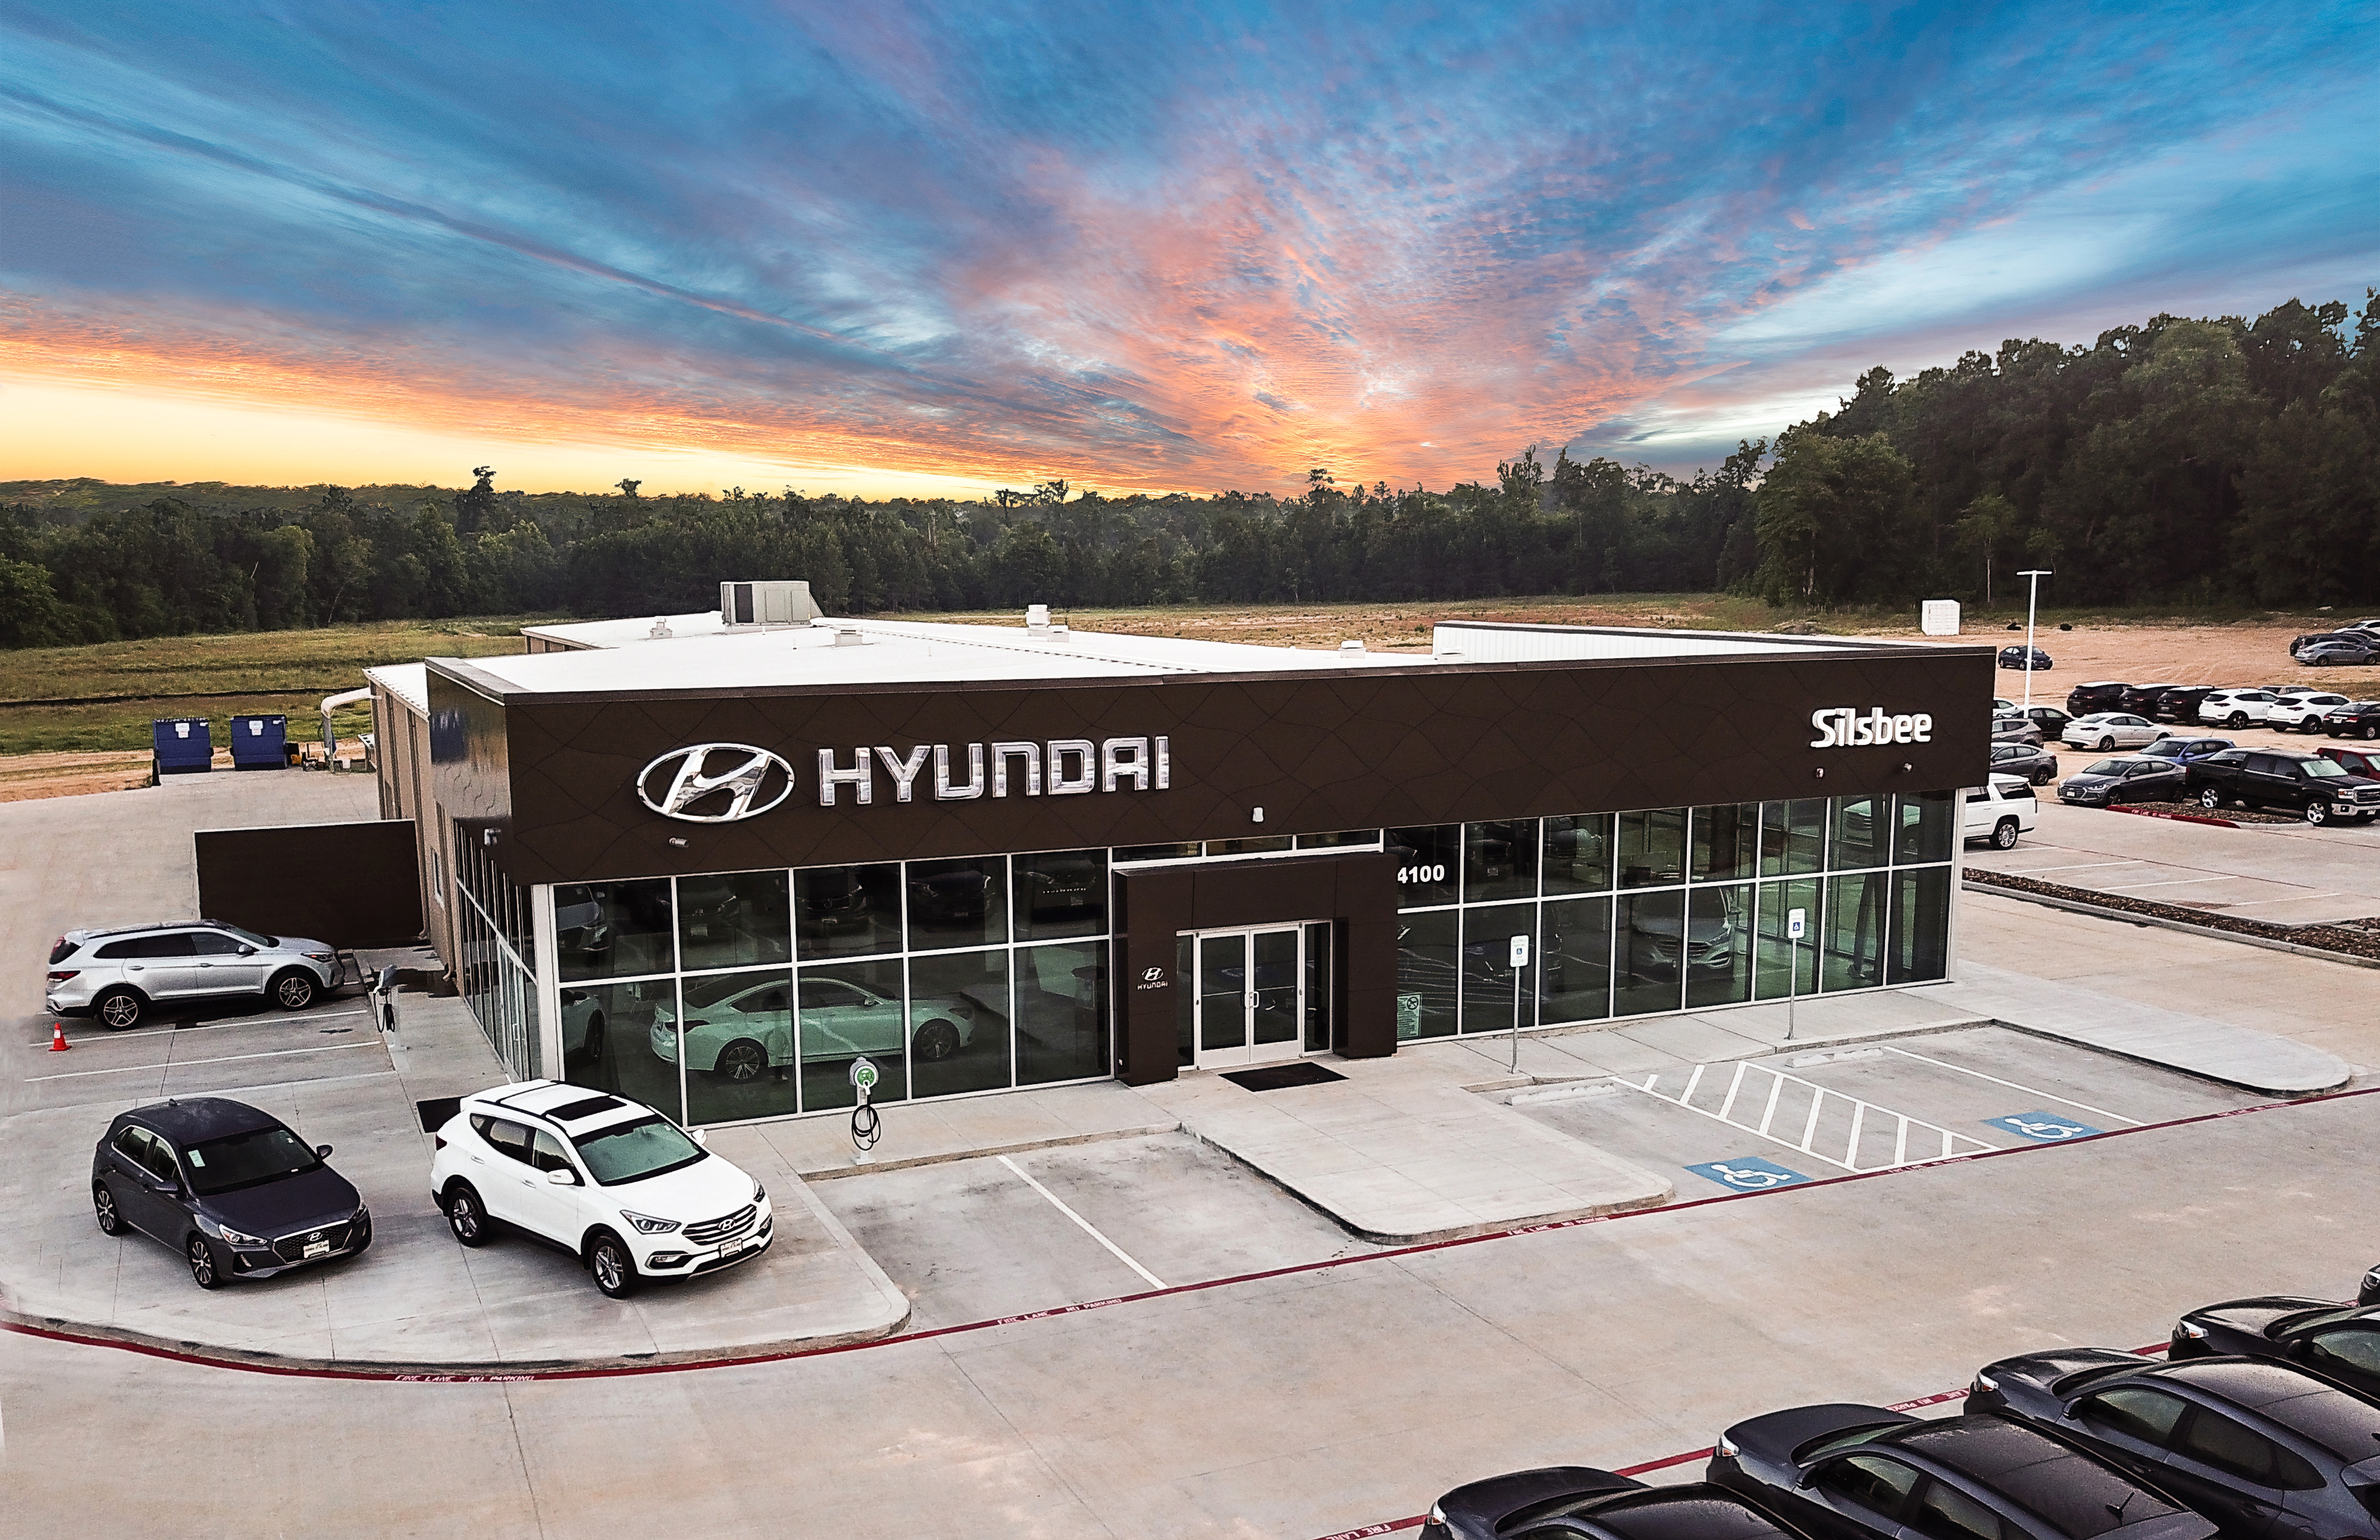 Professional Real Estate Photograph of a Car Showroom